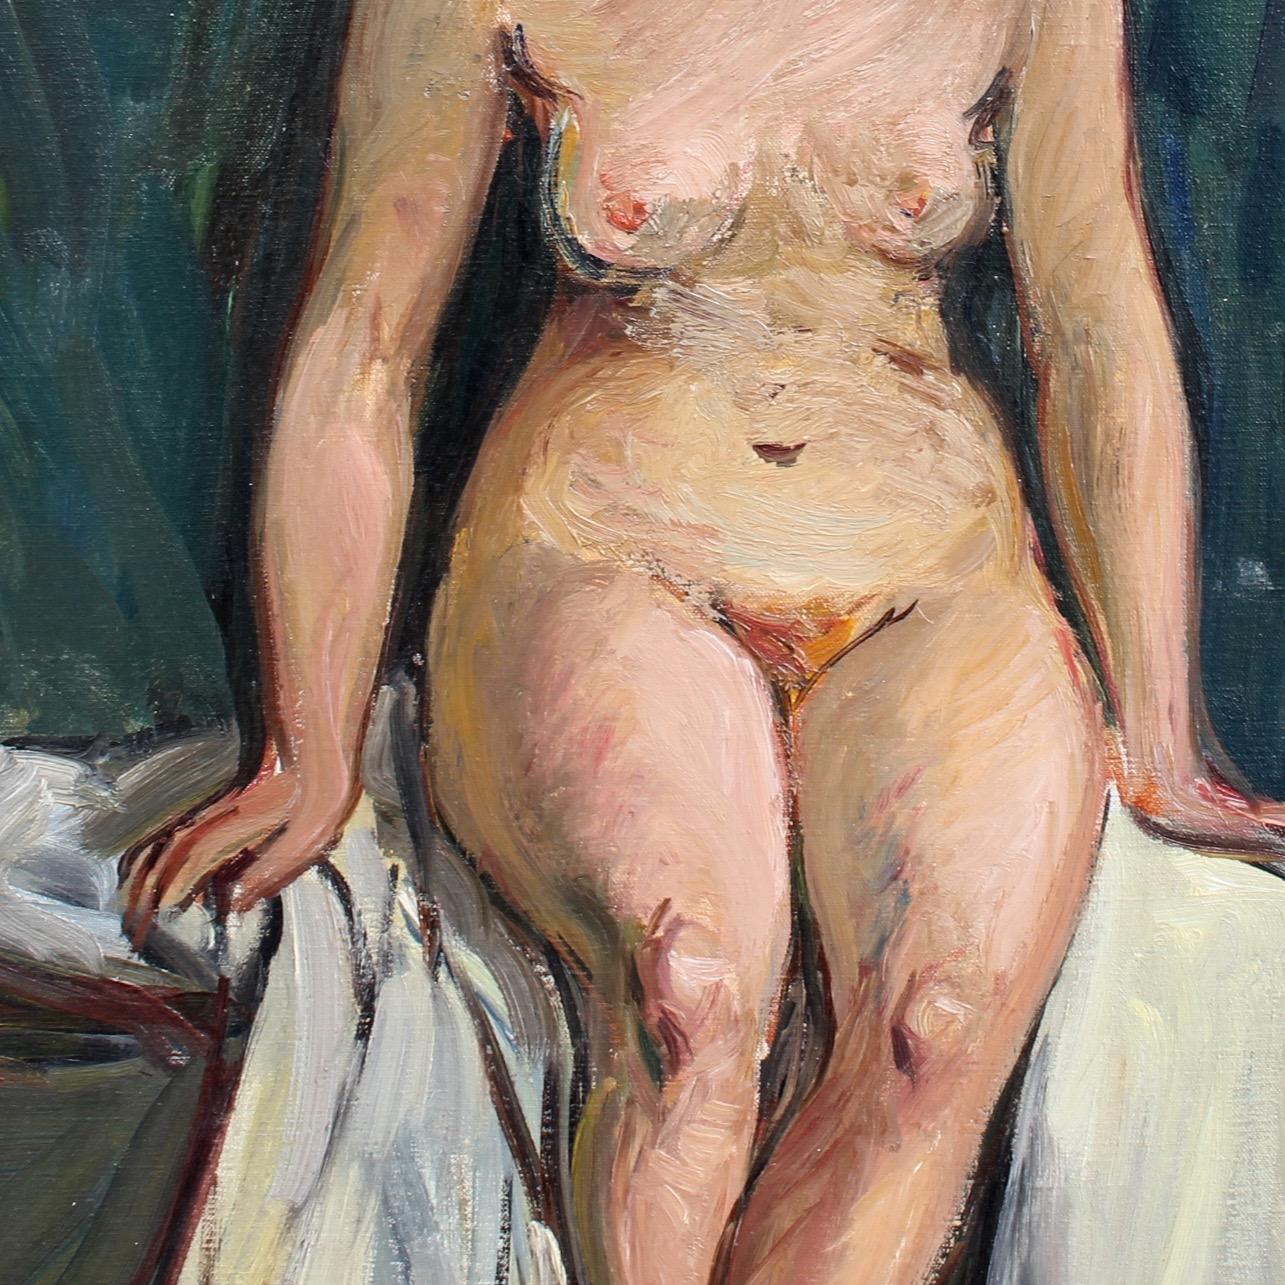 'Portrait of Nude Redhead', oil on canvas, circa 1940s, by Louise-Jeanne Cottard-Fossey (1902 - 1983). A young, red-headed woman poses for the artist. Her shyness is apparent. Demure, reserved and somewhat uncomfortable as the centre of attention,